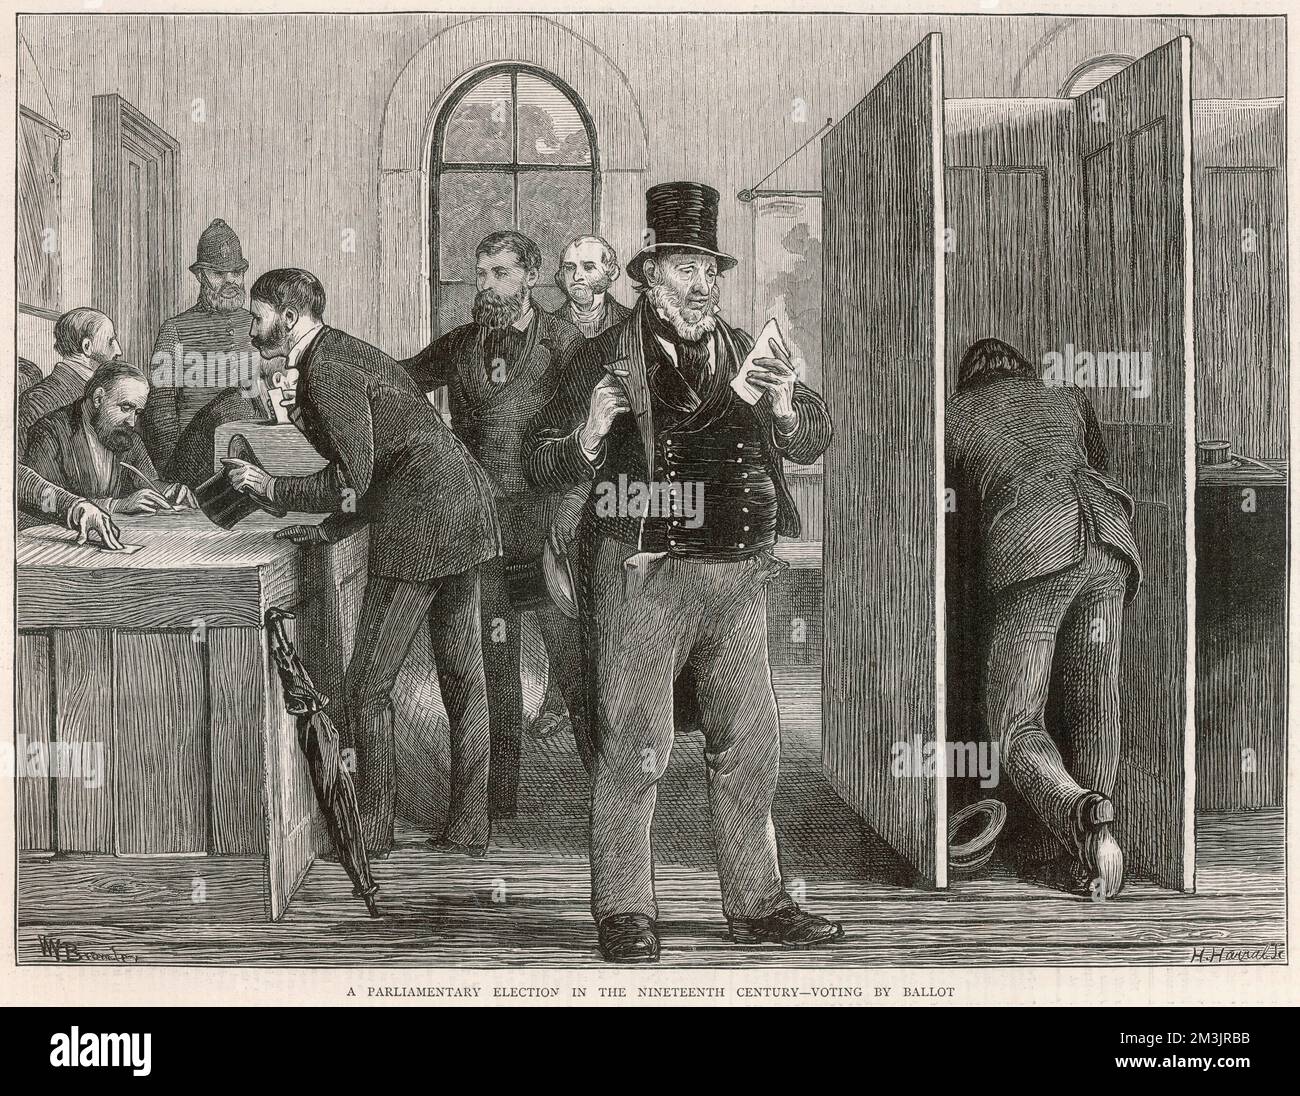 H. Harral and W.V Bromley's impression of men voting by ballot in a Nineteenth Century parliamentary election.     Date: 1873 Stock Photo